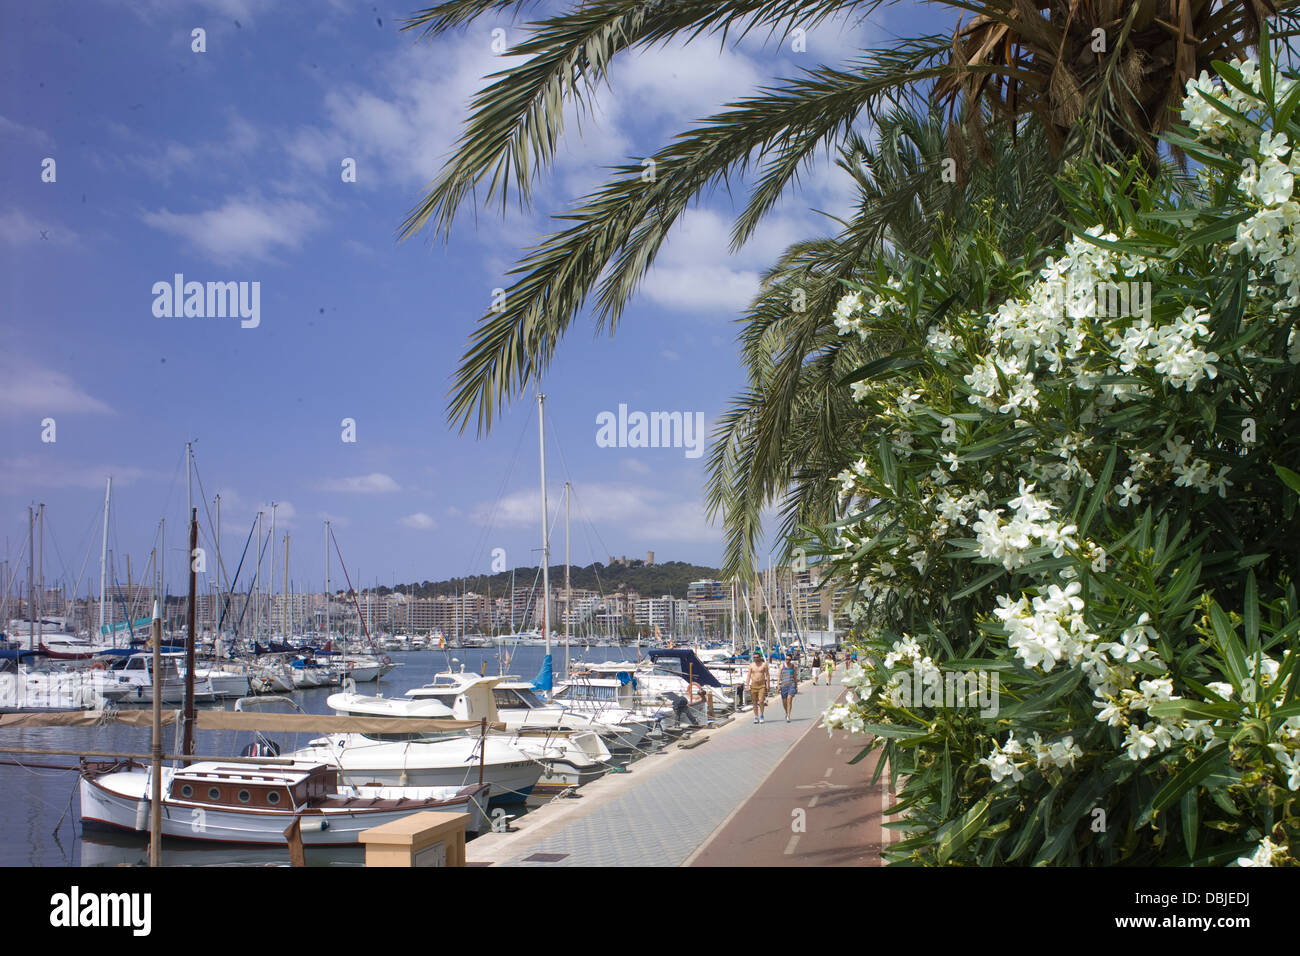 The waterside path for walking and cycling, alongside the boats in the marina at Palma de Mallorca Stock Photo